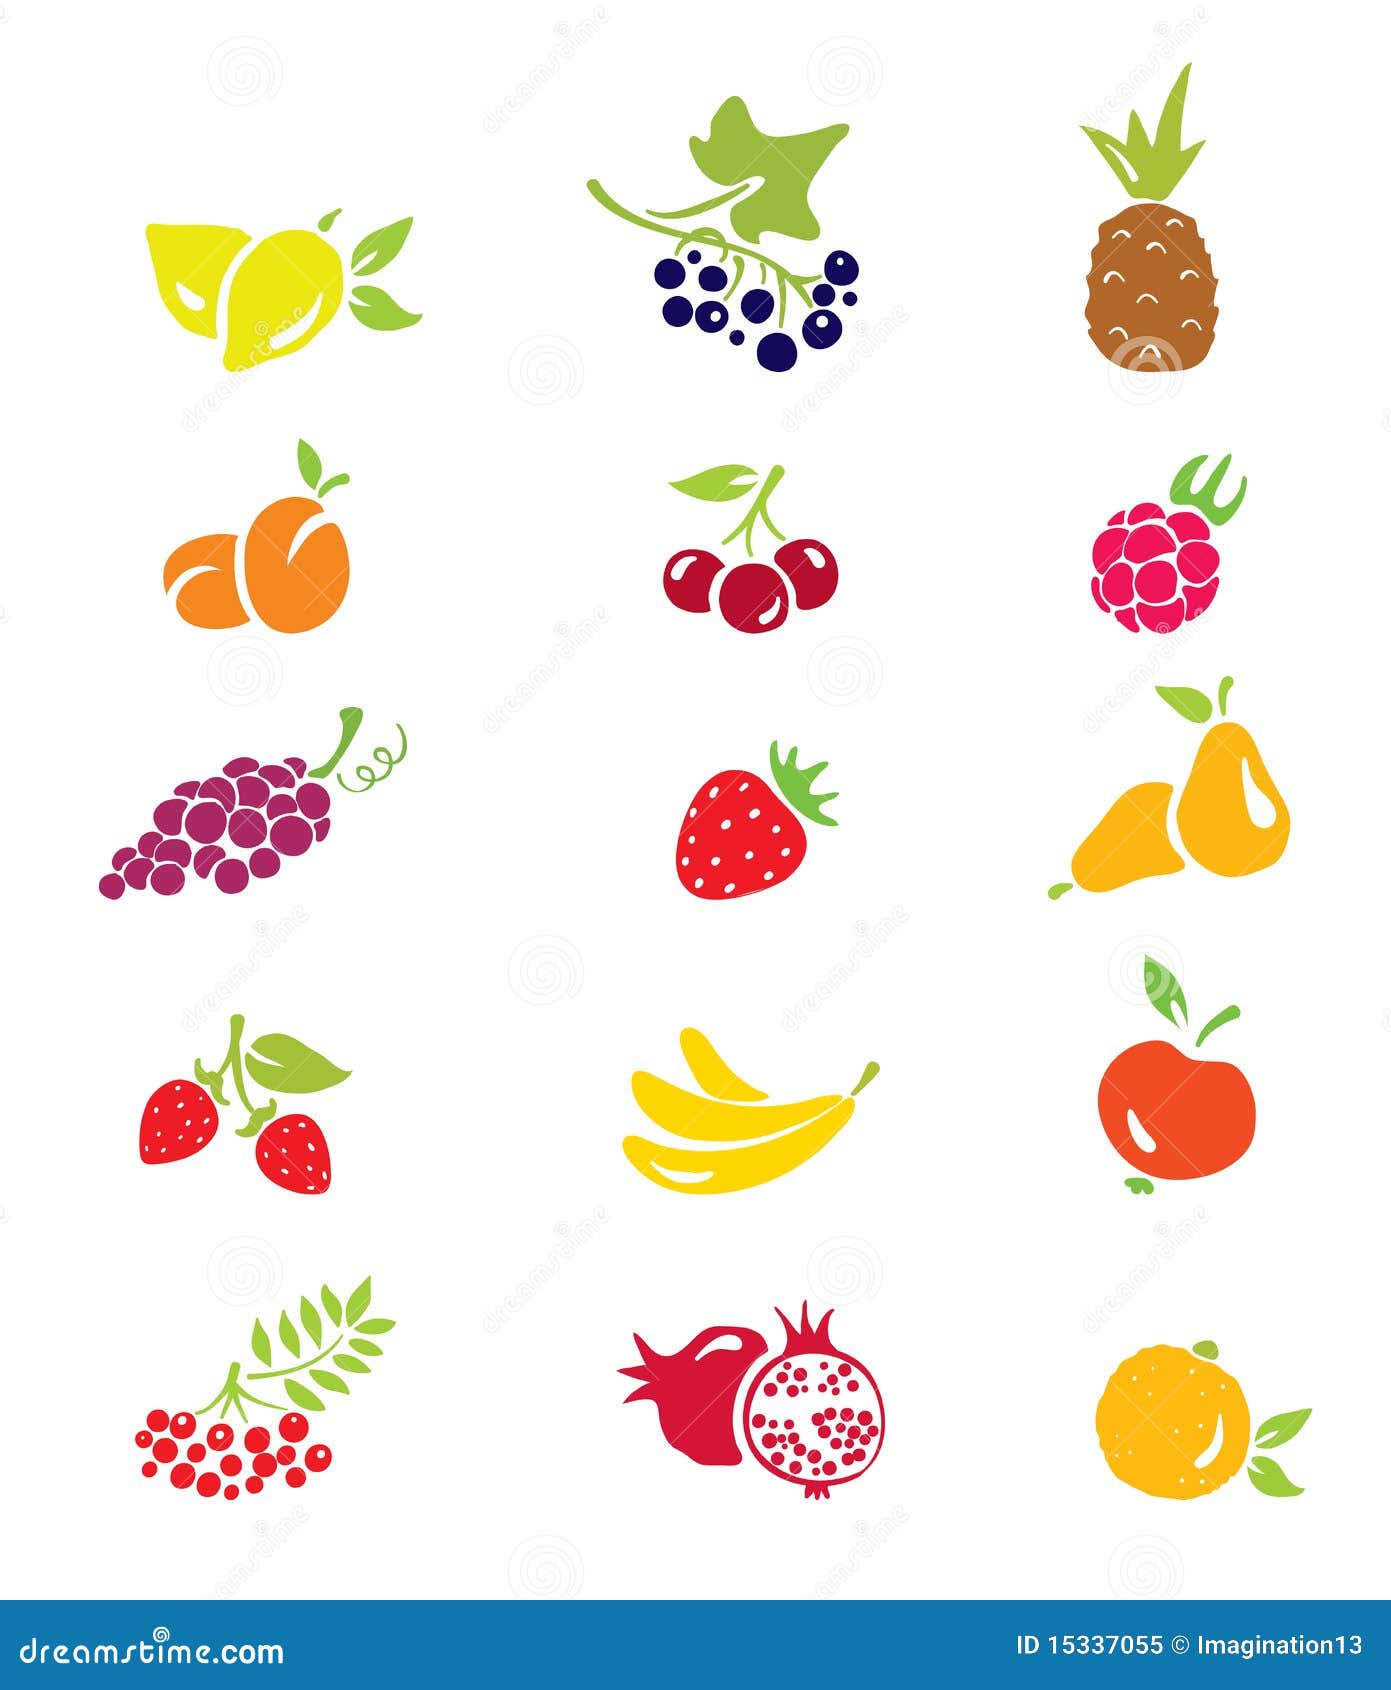 icons - fruits and berries